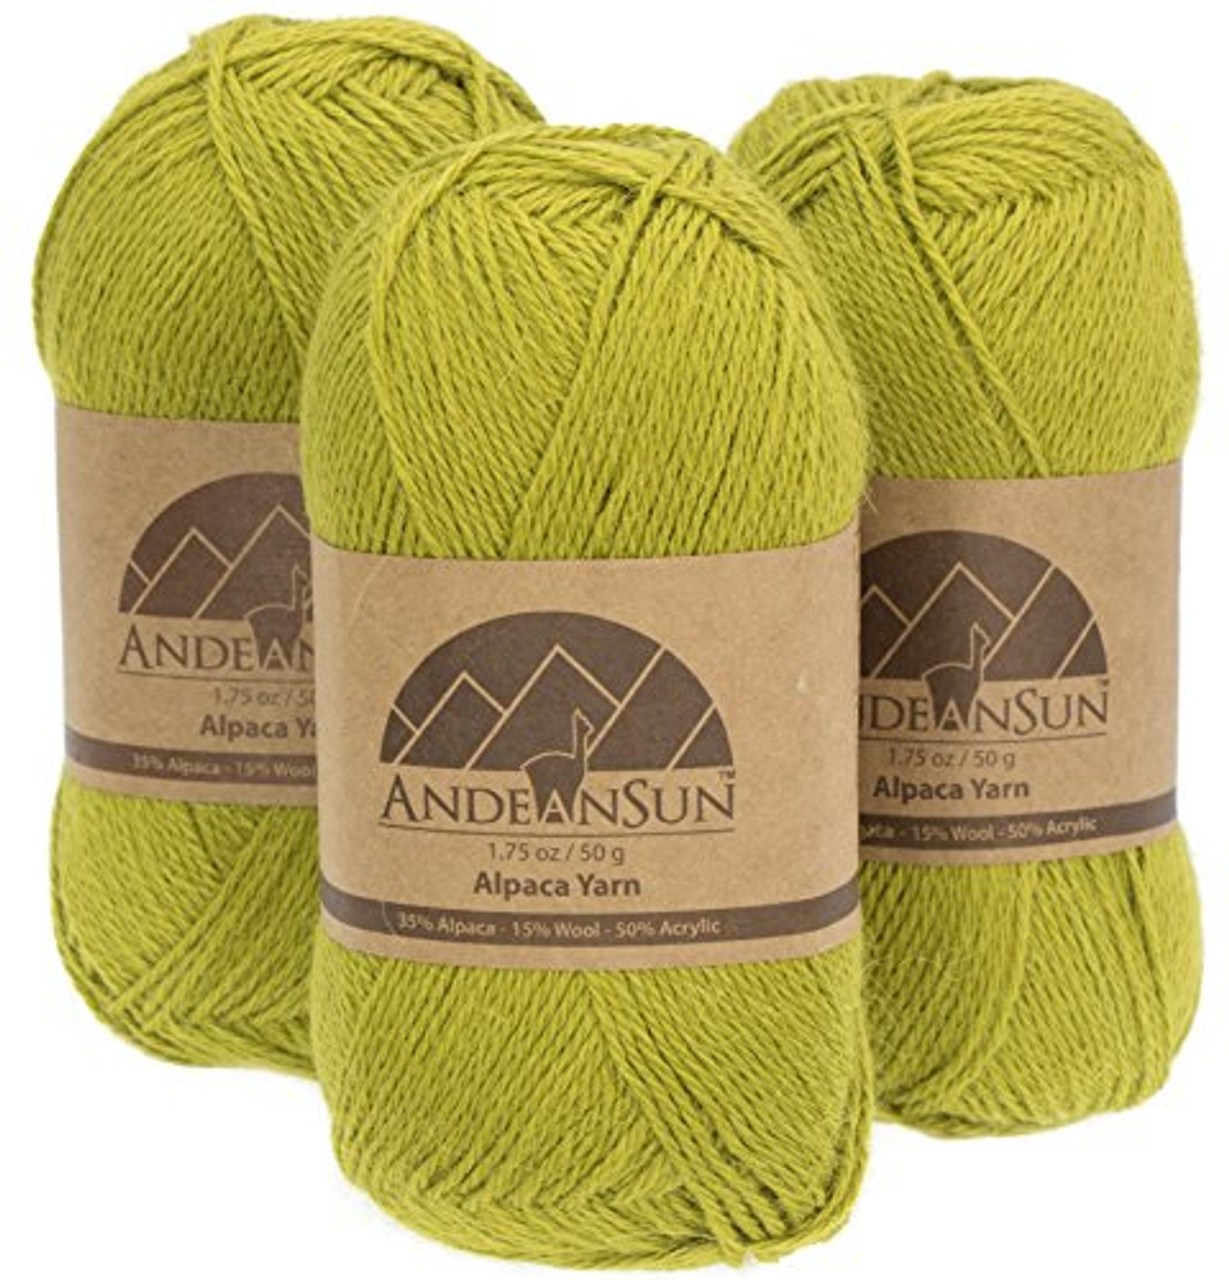 NEW-Alpaca Blend Yarn (Weight #5) BULKY - SET OF 3 Skeins 150 GRAMS TOTAL  by AndeanSun - Llacta